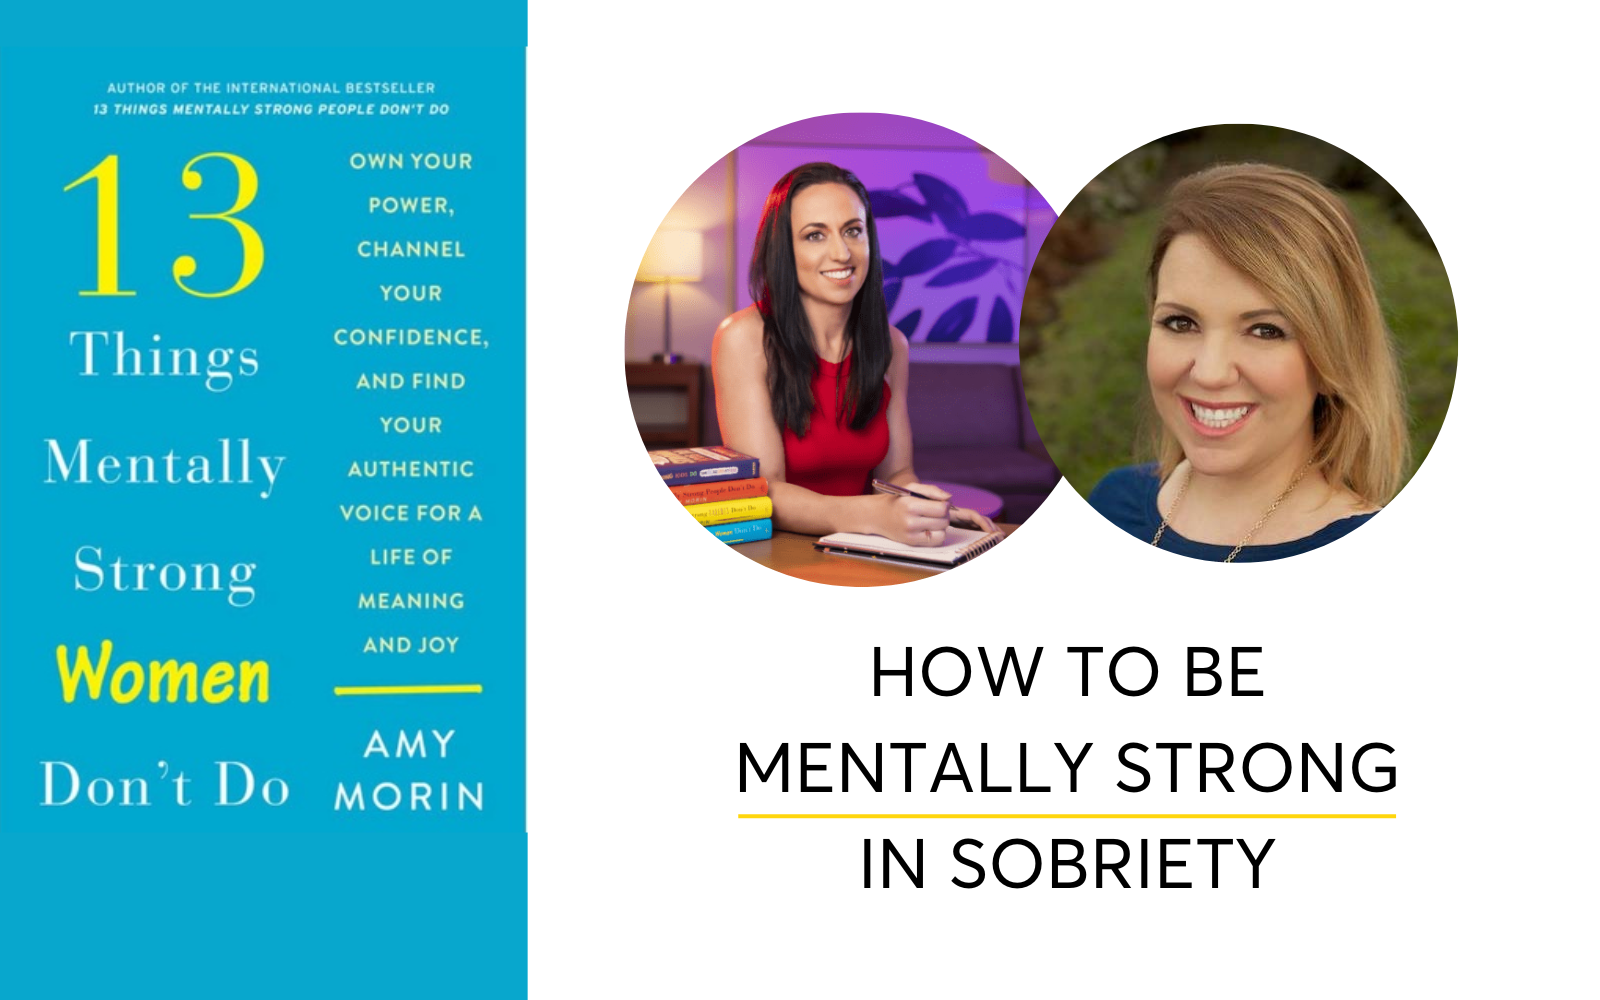 Things Mentally Strong People Don’t Do In Sobriety